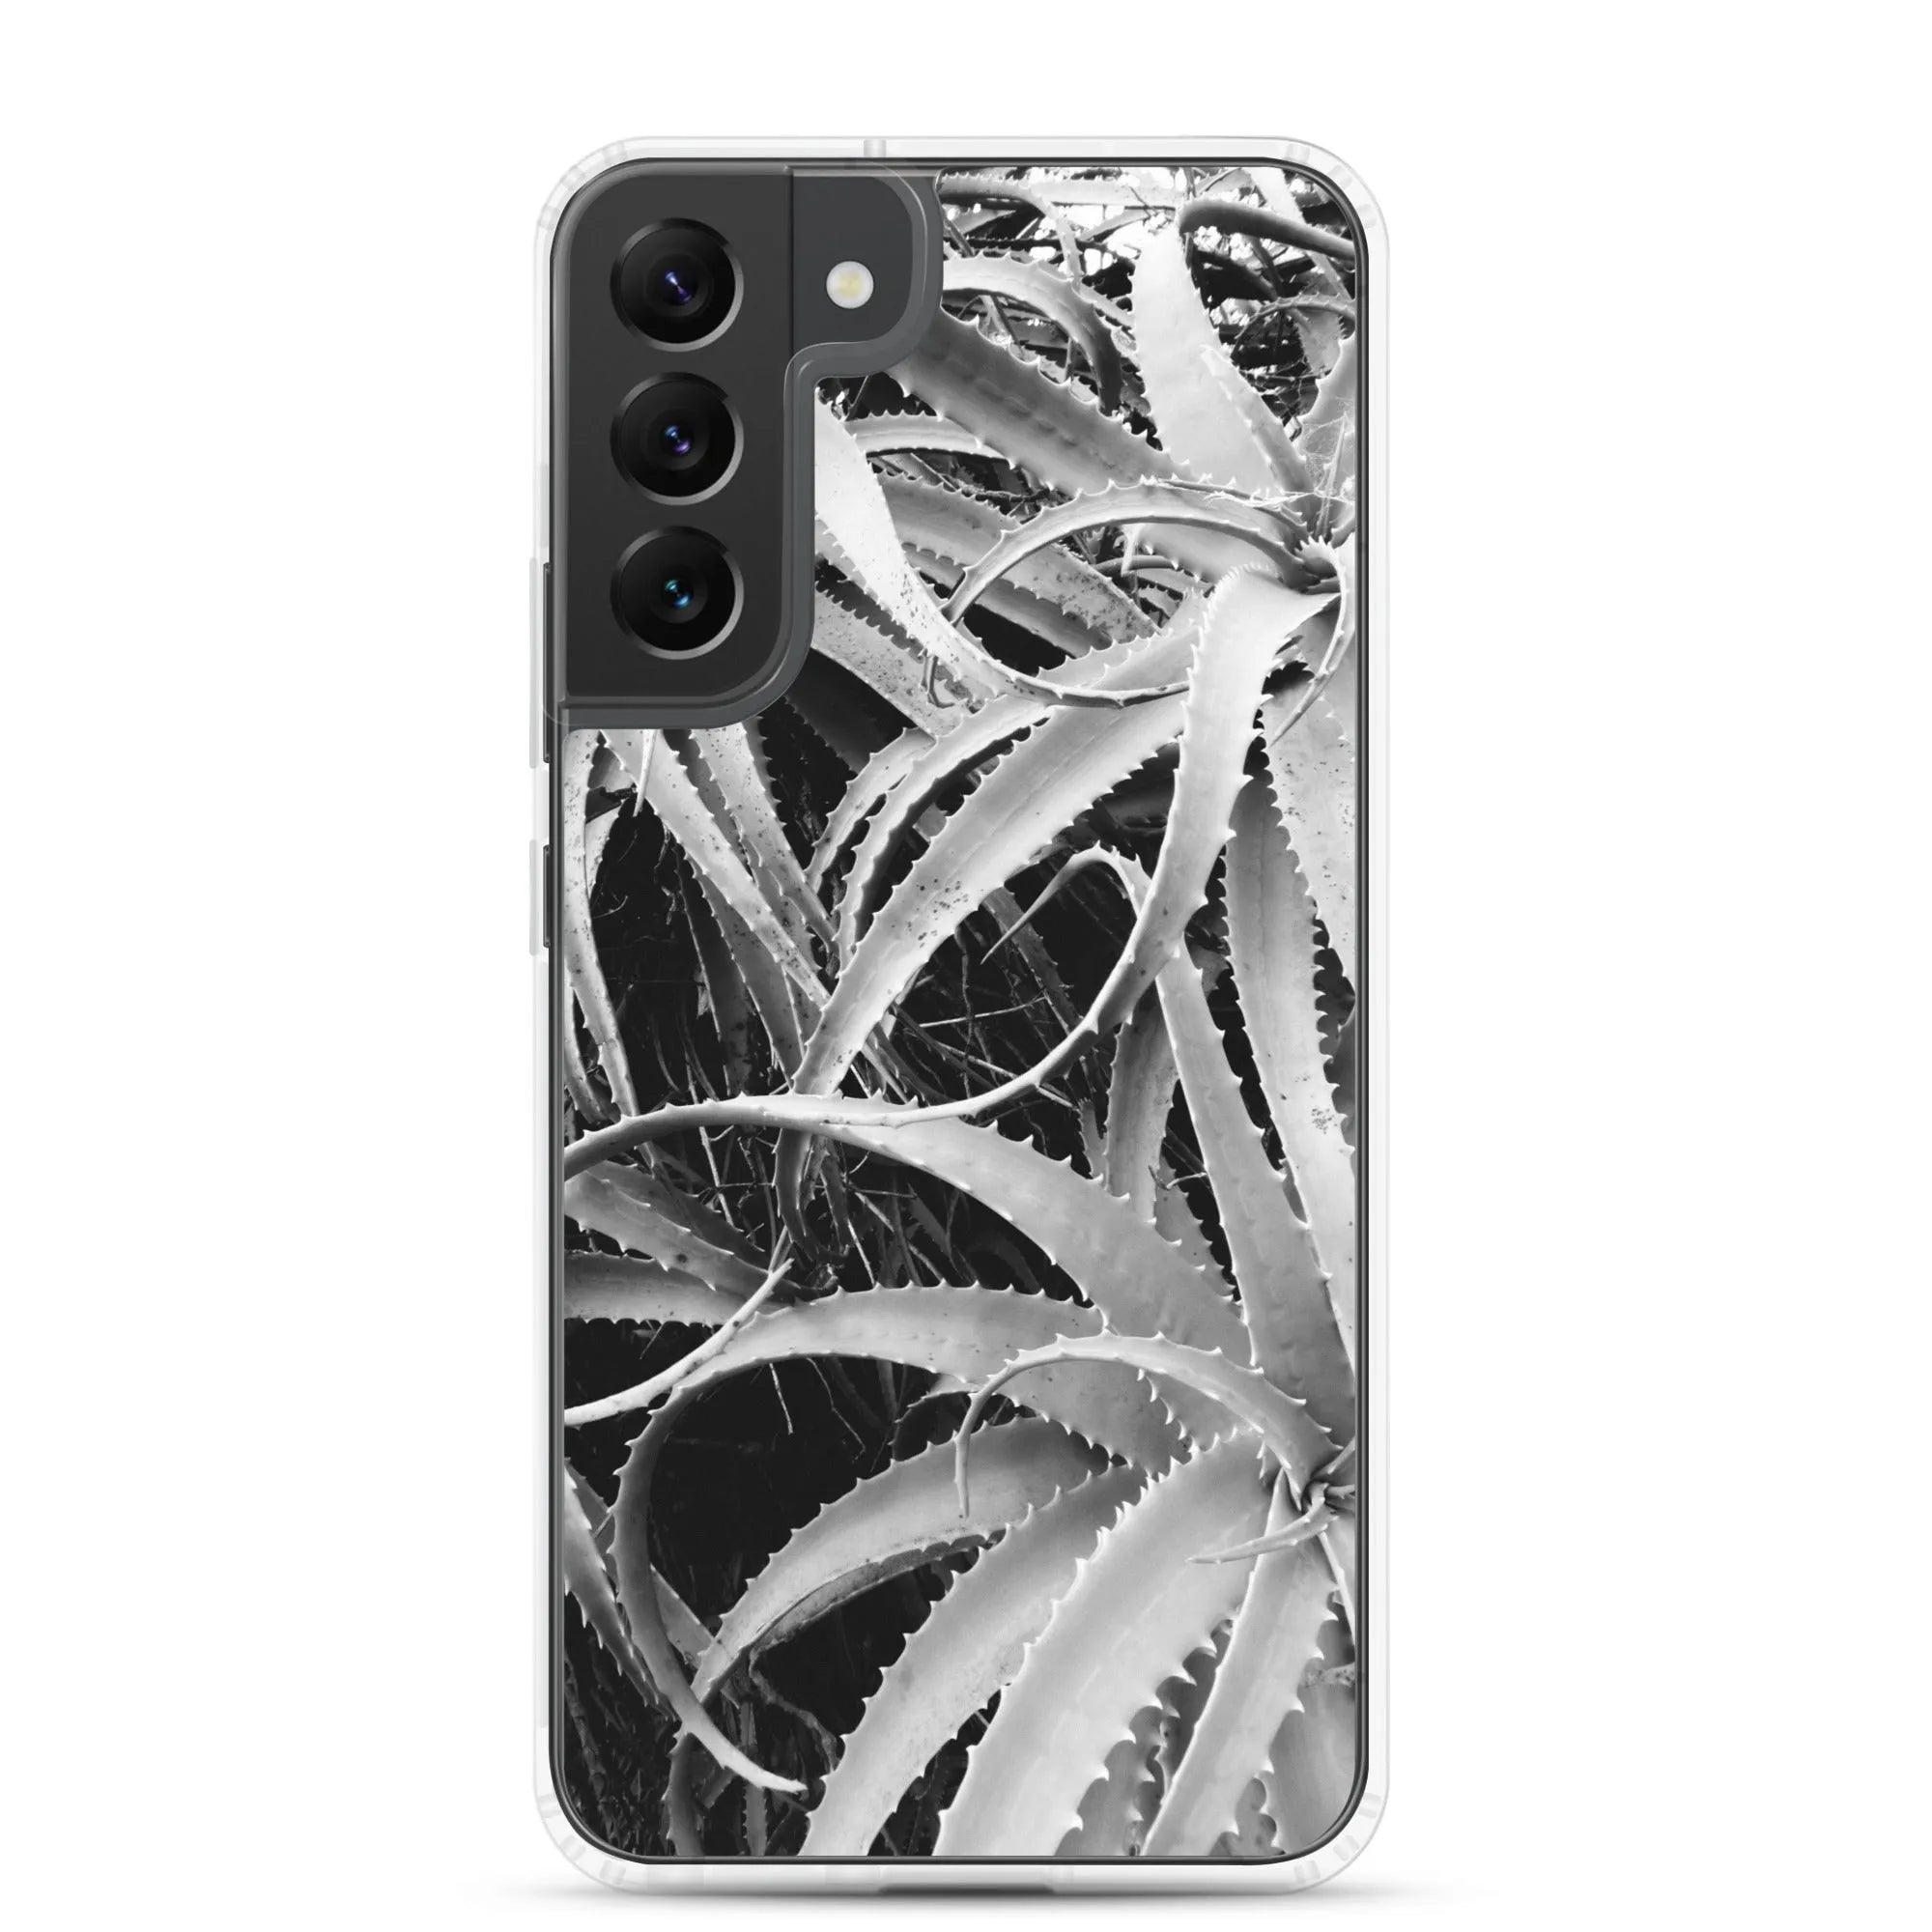 Spiked 2 + Too Samsung Galaxy Case - Black And White - Samsung Galaxy S22 Plus - Mobile Phone Cases - Aesthetic Art